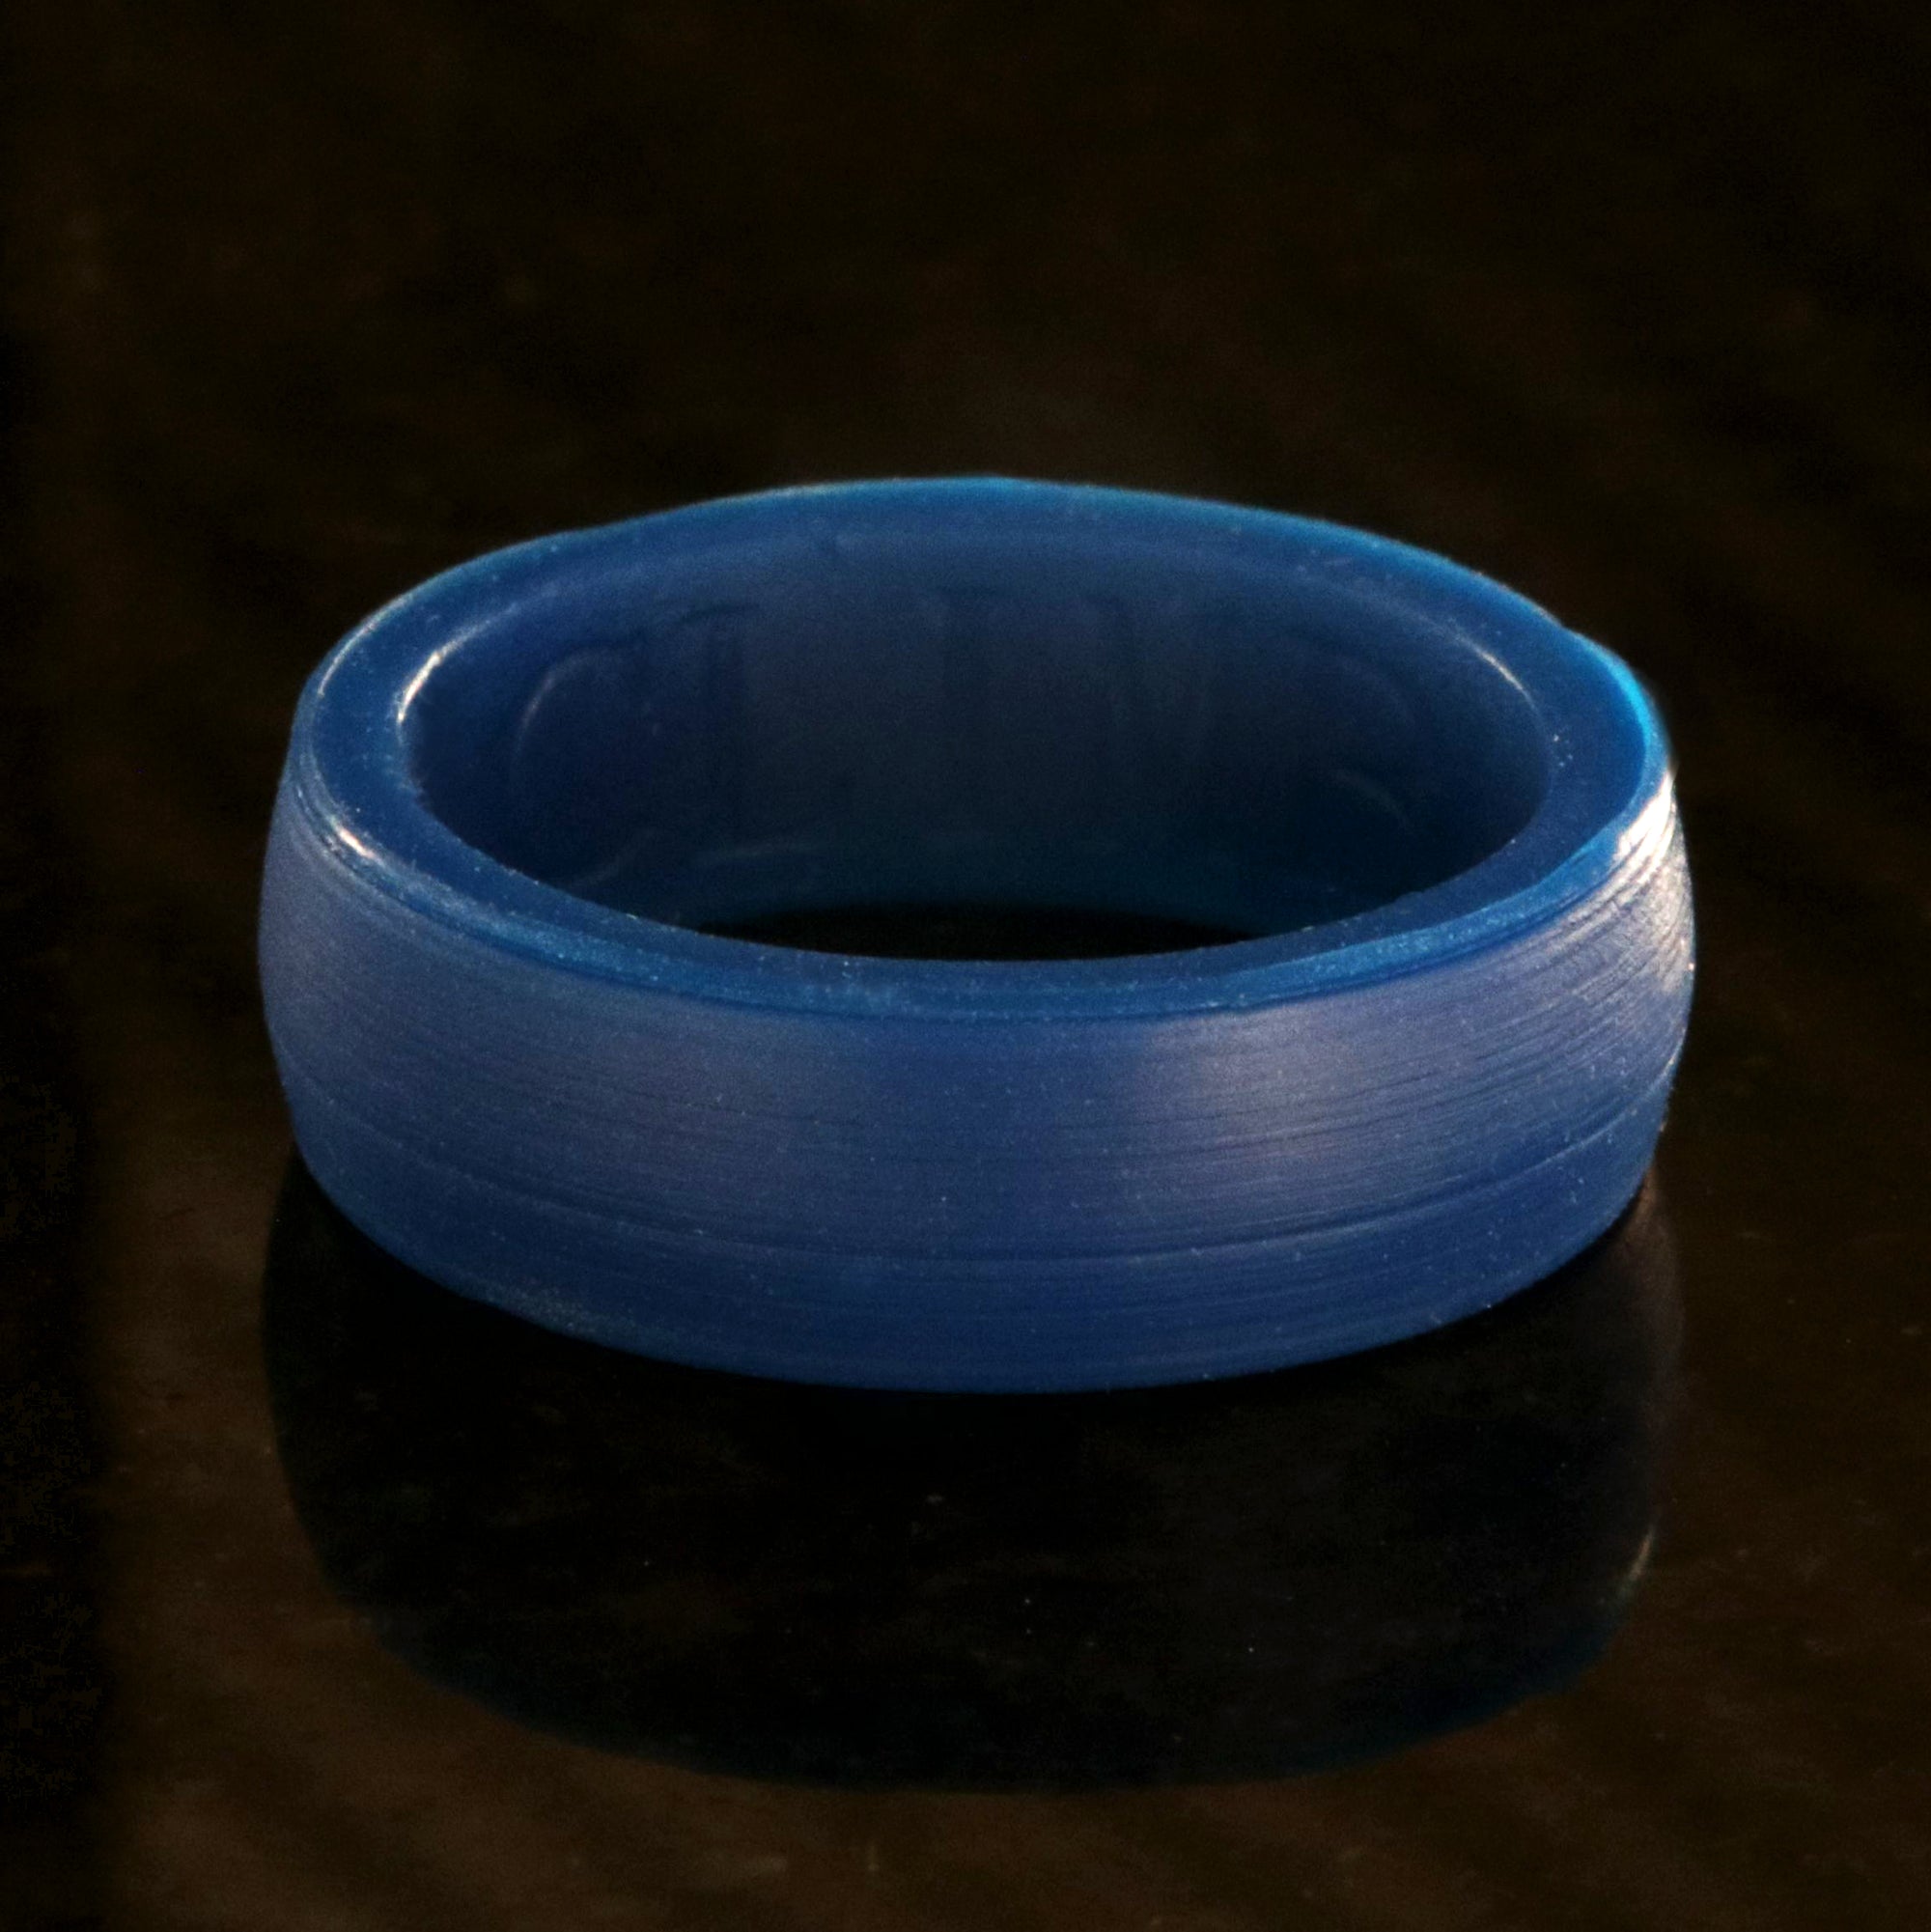 6mm wide blue silicone CLIMB band